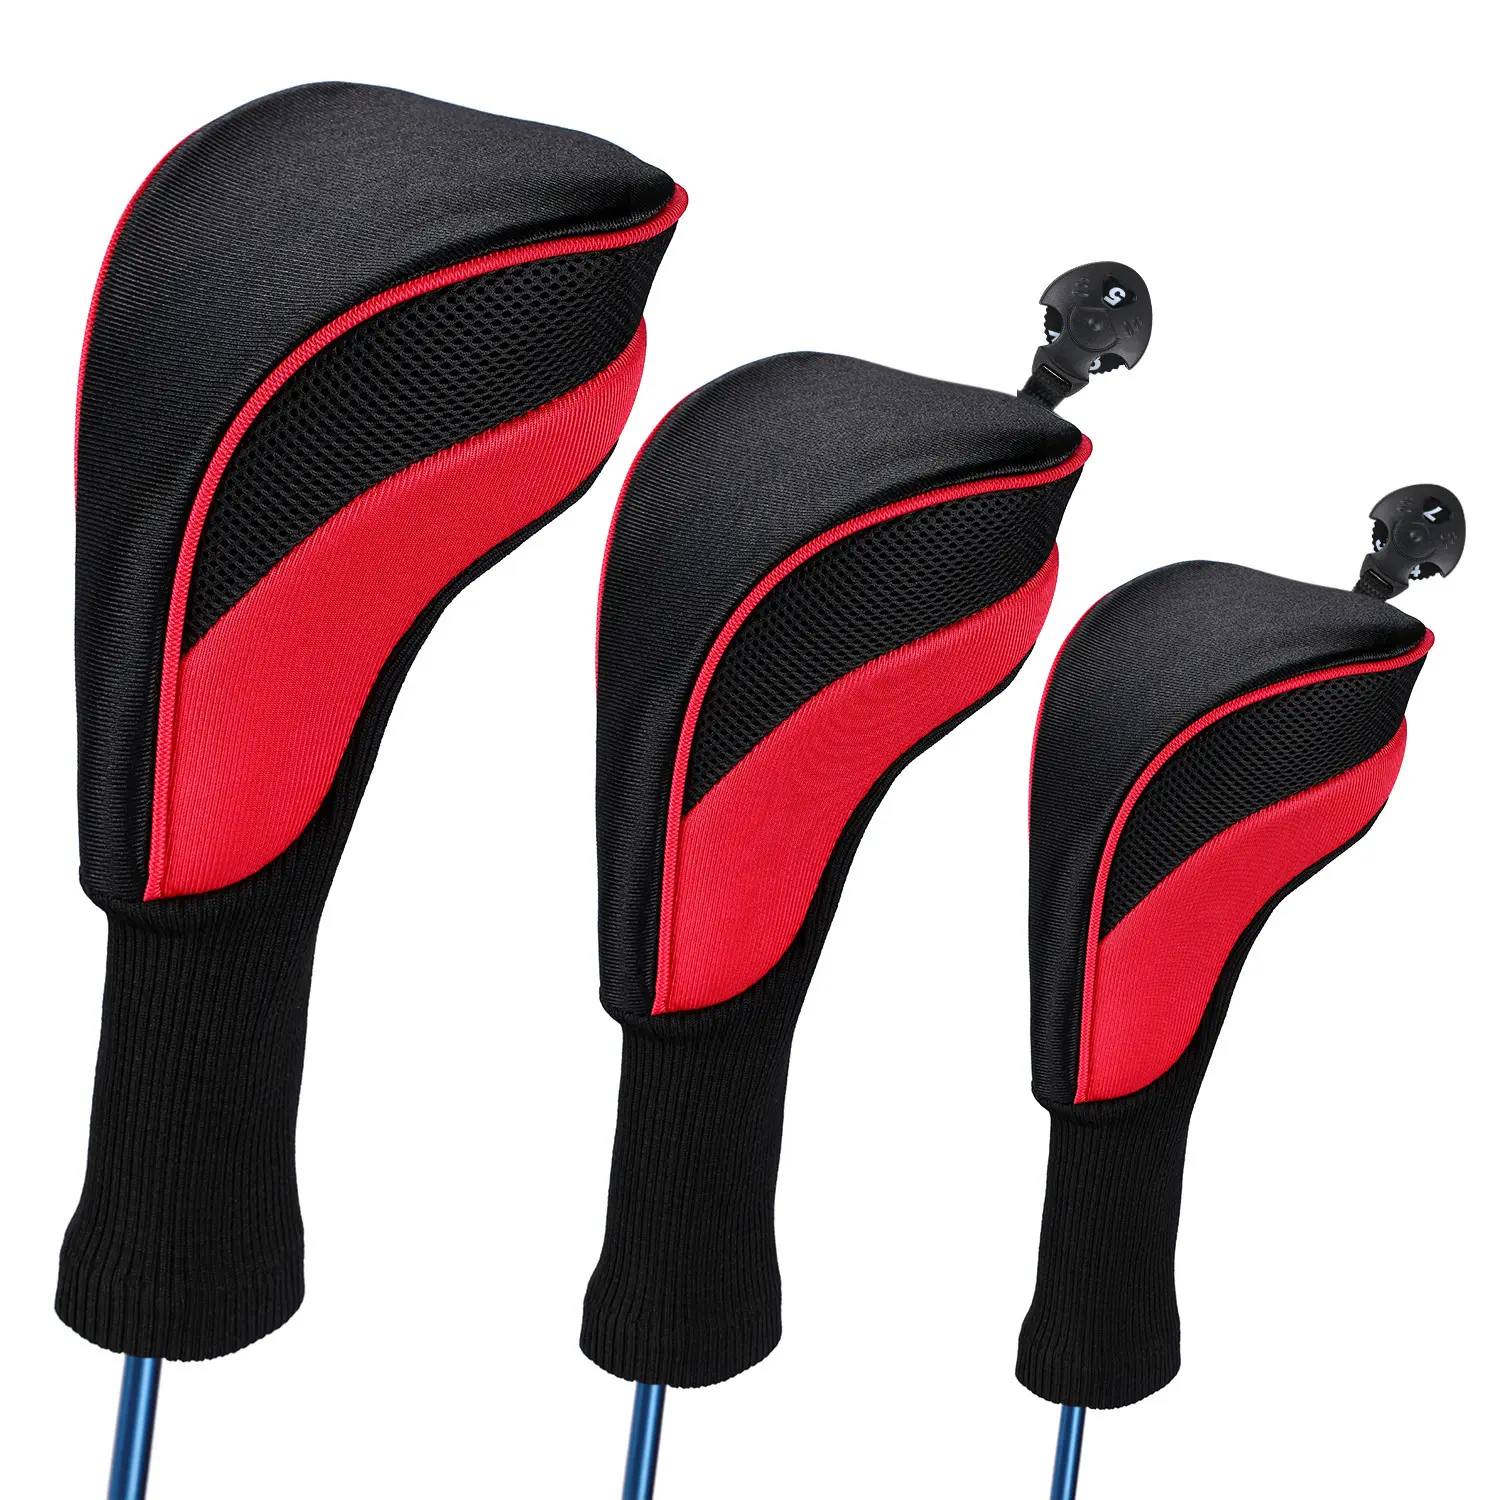 3 pcs/set nylon golf sport club putter headcover durable 1 3 5 driver fairway head cover cue protection gear with digital dial